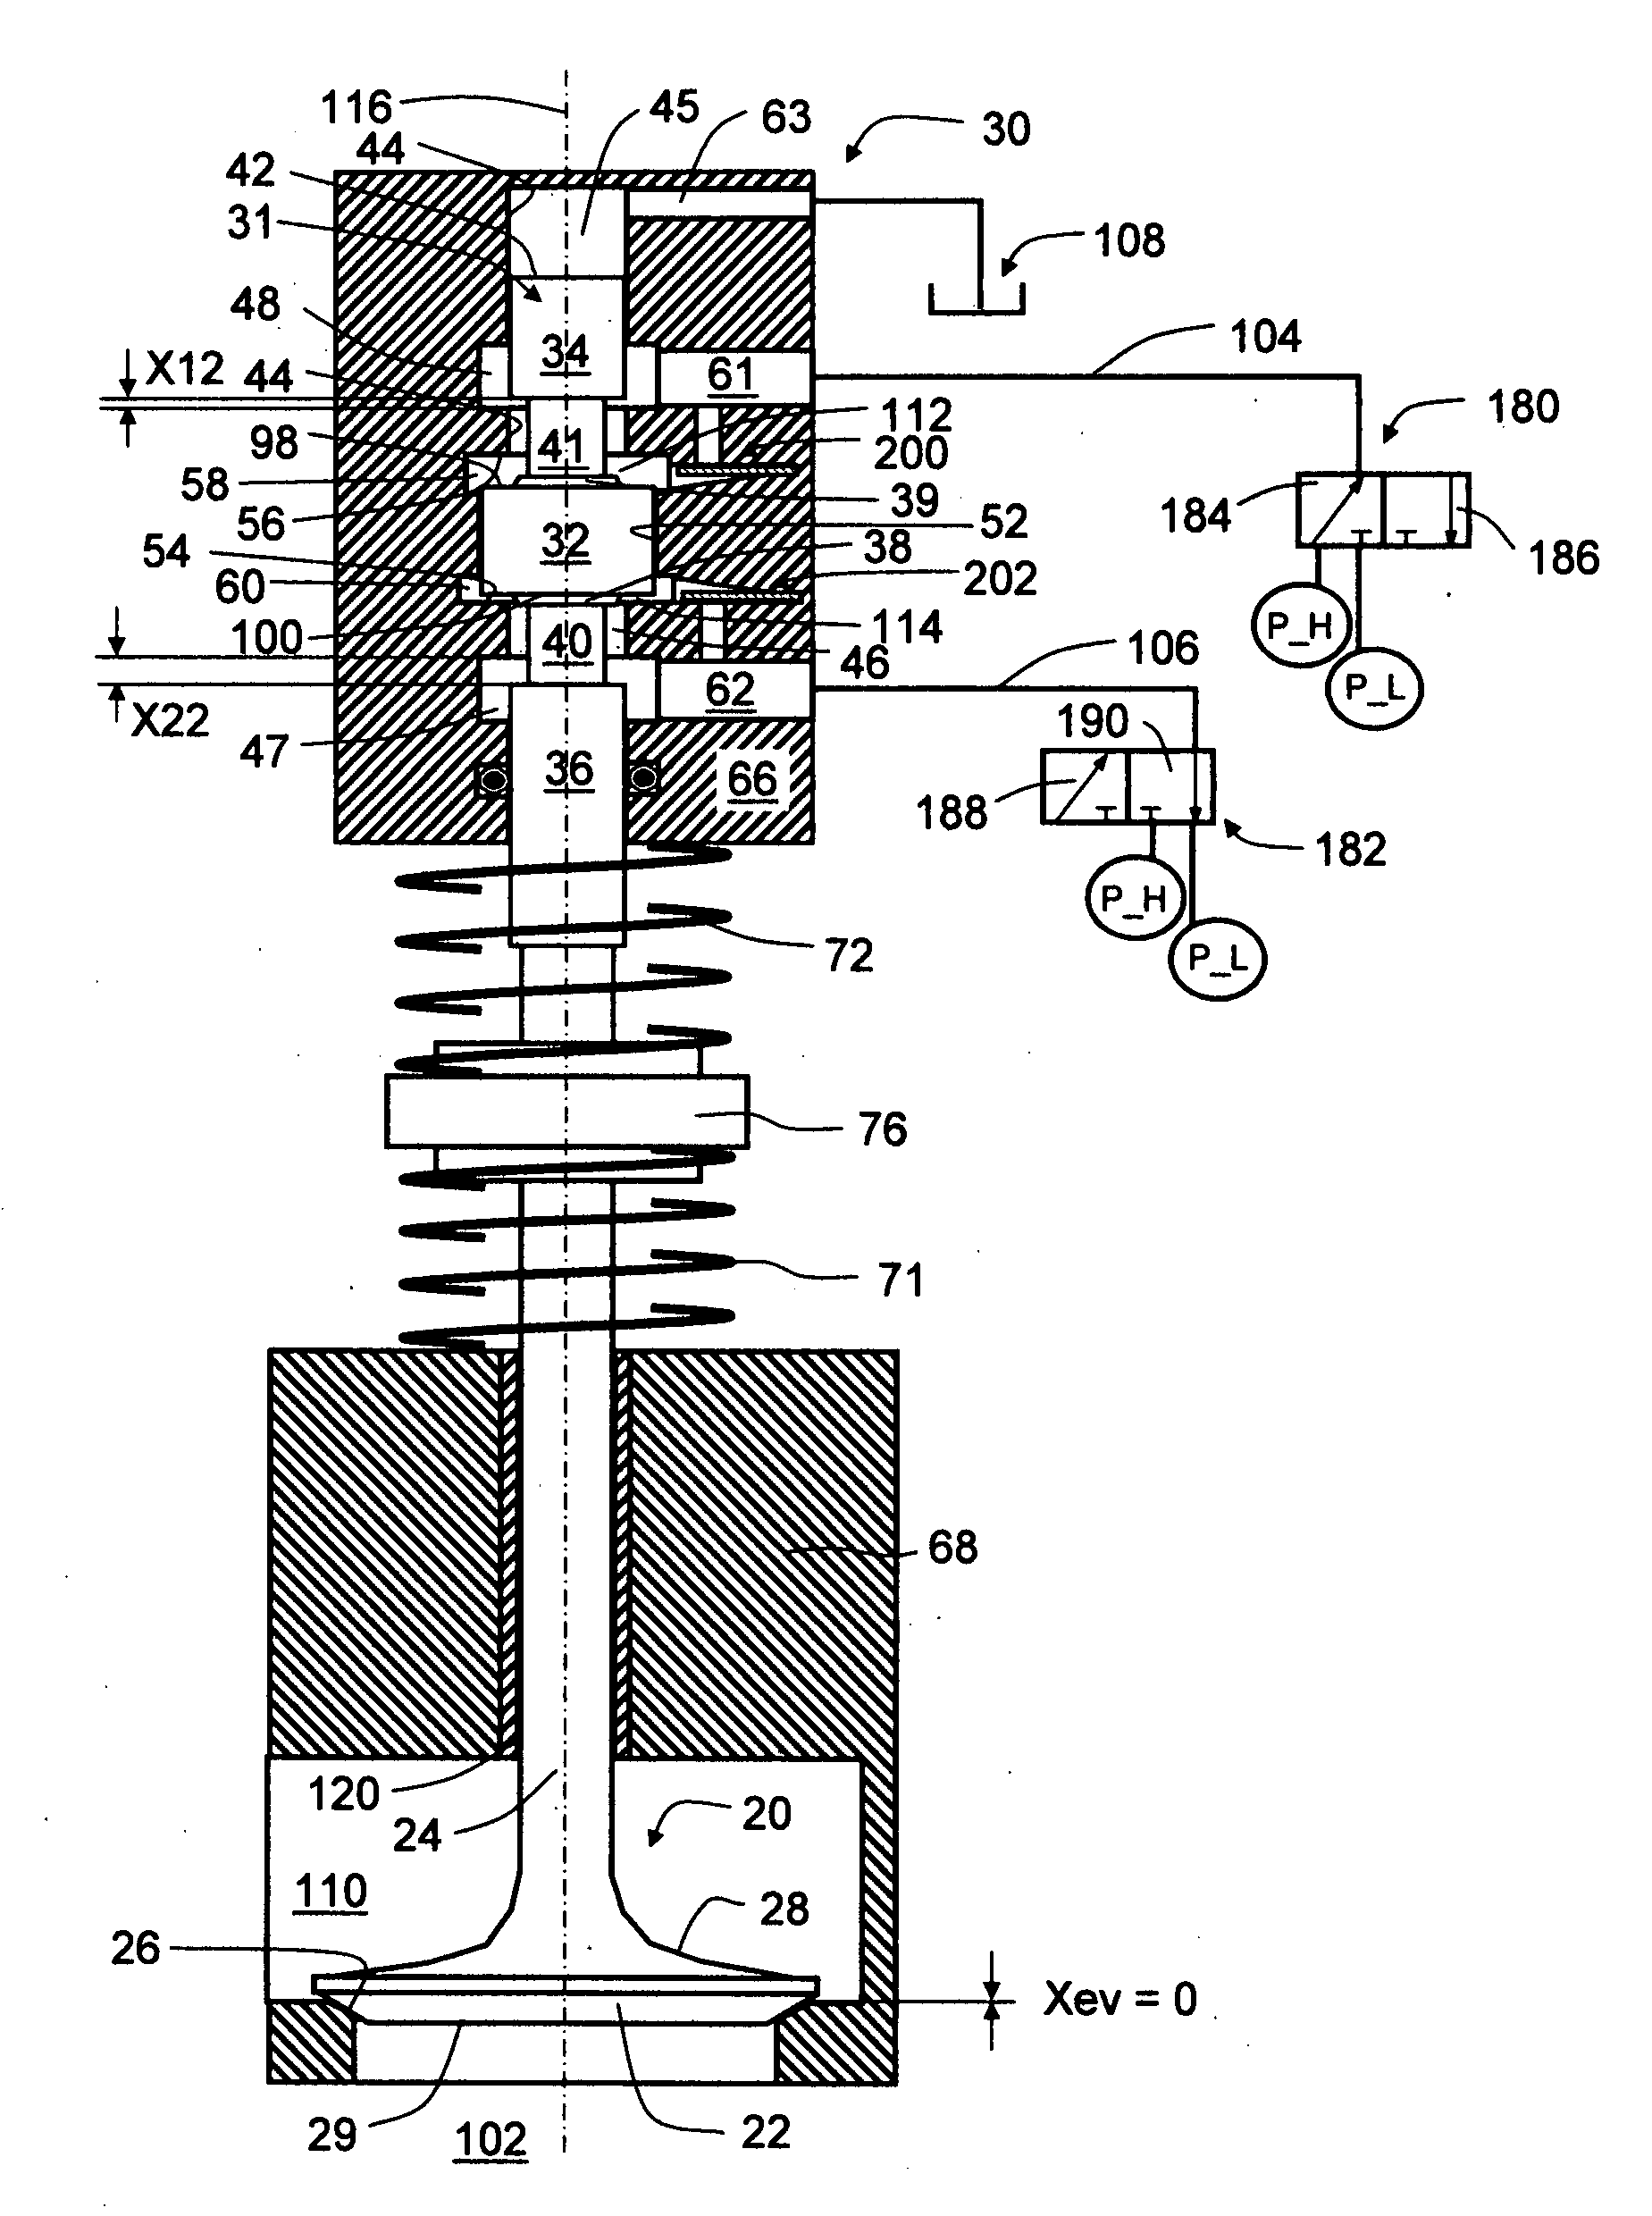 Variable valve actuator with latches at both ends